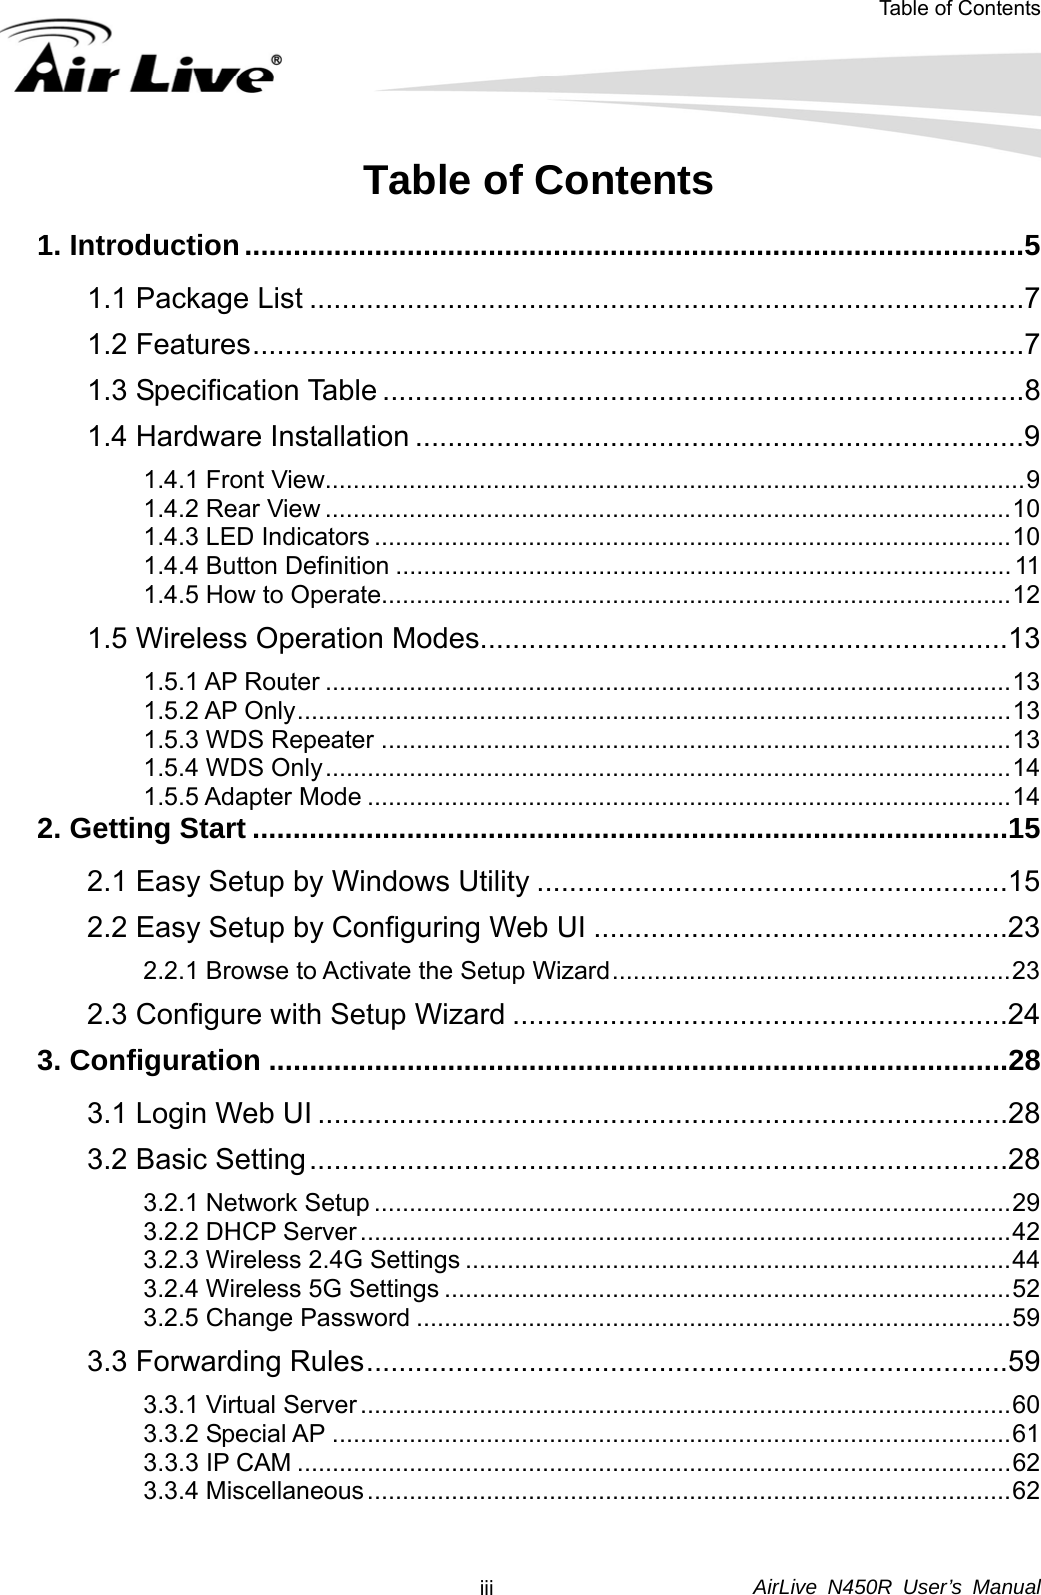 Table of Contents  AirLive N450R User’s Manual  iiiTable of Contents 1. Introduction................................................................................................5 1.1 Package List ........................................................................................7 1.2 Features...............................................................................................7 1.3 Specification Table ...............................................................................8 1.4 Hardware Installation ...........................................................................9 1.4.1 Front View....................................................................................................9 1.4.2 Rear View ..................................................................................................10 1.4.3 LED Indicators ...........................................................................................10 1.4.4 Button Definition ........................................................................................ 11 1.4.5 How to Operate..........................................................................................12 1.5 Wireless Operation Modes.................................................................13 1.5.1 AP Router ..................................................................................................13 1.5.2 AP Only......................................................................................................13 1.5.3 WDS Repeater ..........................................................................................13 1.5.4 WDS Only..................................................................................................14 1.5.5 Adapter Mode ............................................................................................14 2. Getting Start .............................................................................................15 2.1 Easy Setup by Windows Utility ..........................................................15 2.2 Easy Setup by Configuring Web UI ...................................................23 2.2.1 Browse to Activate the Setup Wizard.........................................................23 2.3 Configure with Setup Wizard .............................................................24 3. Configuration ...........................................................................................28 3.1 Login Web UI .....................................................................................28 3.2 Basic Setting......................................................................................28 3.2.1 Network Setup ...........................................................................................29 3.2.2 DHCP Server .............................................................................................42 3.2.3 Wireless 2.4G Settings ..............................................................................44 3.2.4 Wireless 5G Settings .................................................................................52 3.2.5 Change Password .....................................................................................59 3.3 Forwarding Rules...............................................................................59 3.3.1 Virtual Server .............................................................................................60 3.3.2 Special AP .................................................................................................61 3.3.3 IP CAM ......................................................................................................62 3.3.4 Miscellaneous............................................................................................62  